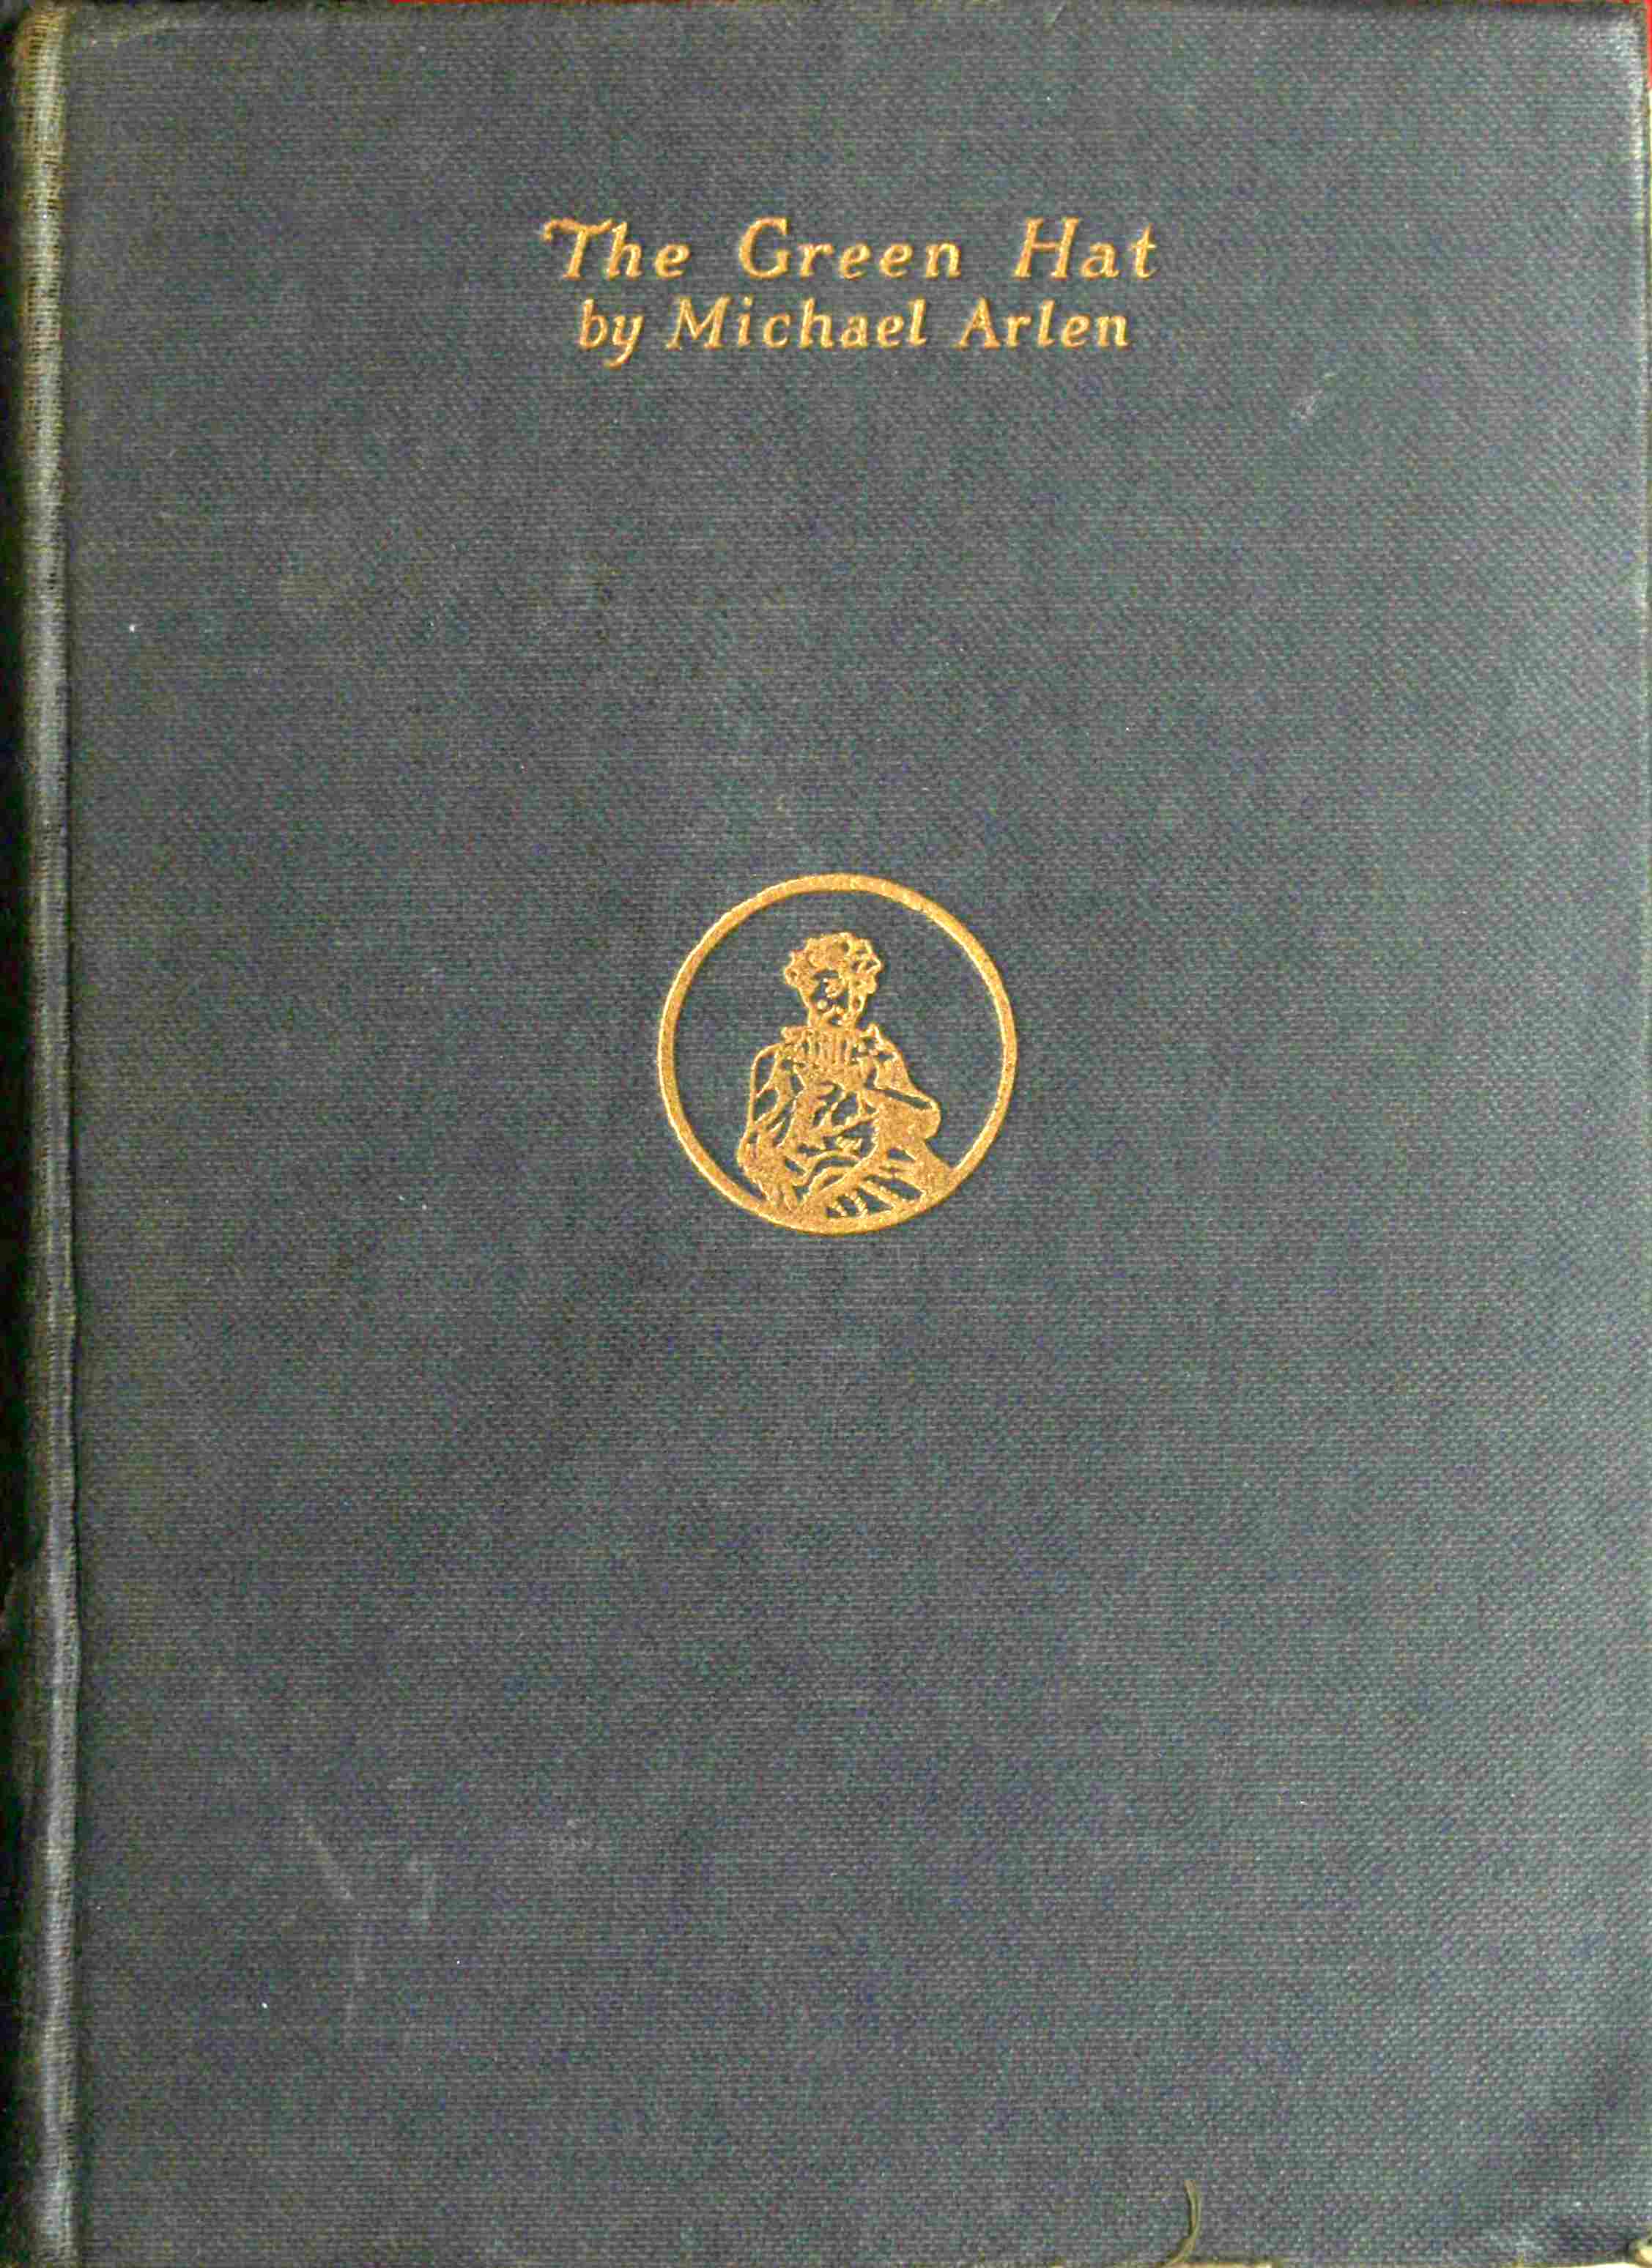 The Project Gutenberg eBook of The Green hat, by Michael Arlen